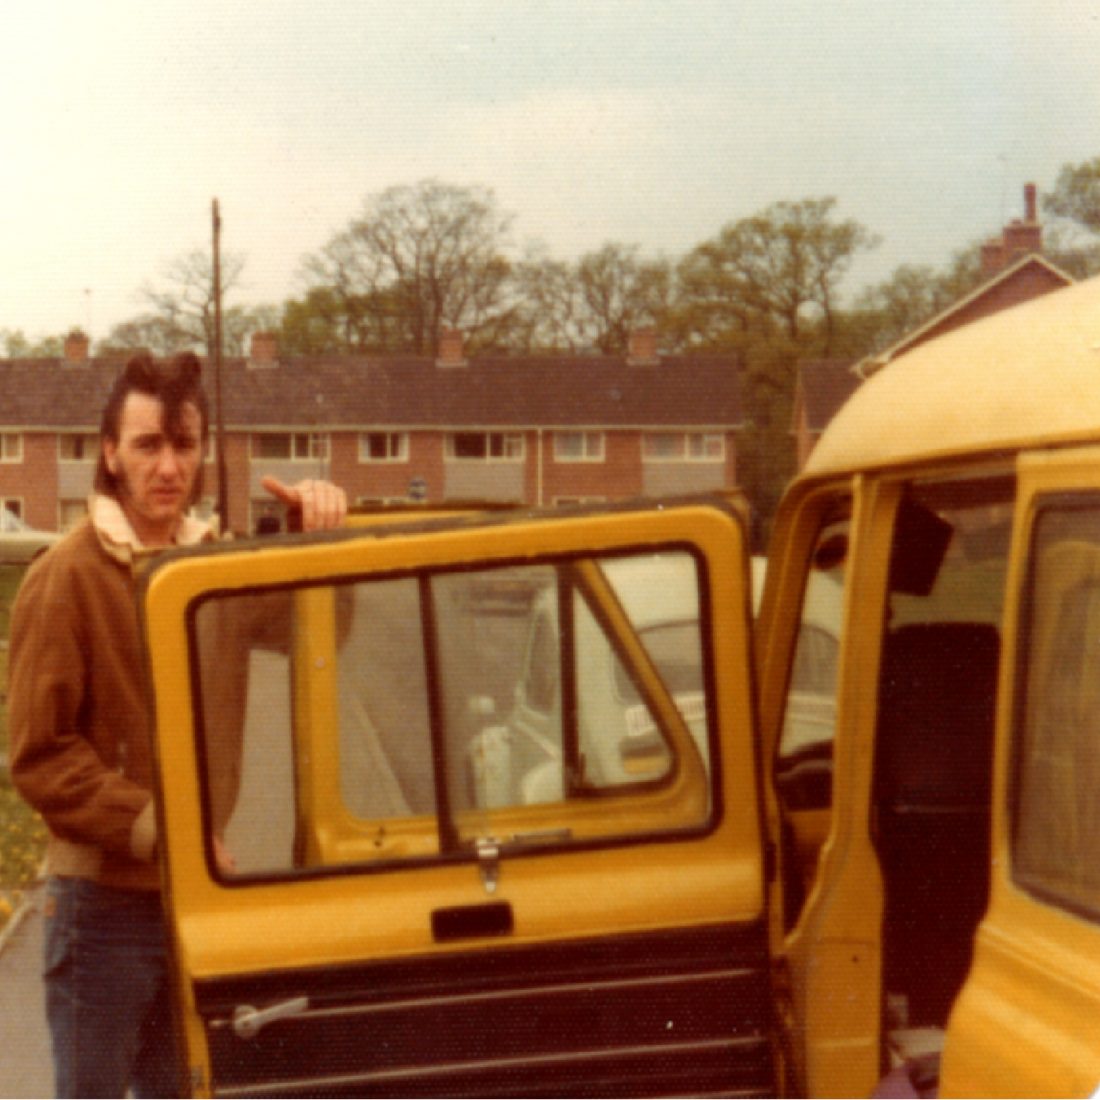 Cavan leaving from his house in Wales 1976 43 years ago pic by Ritchie Gee